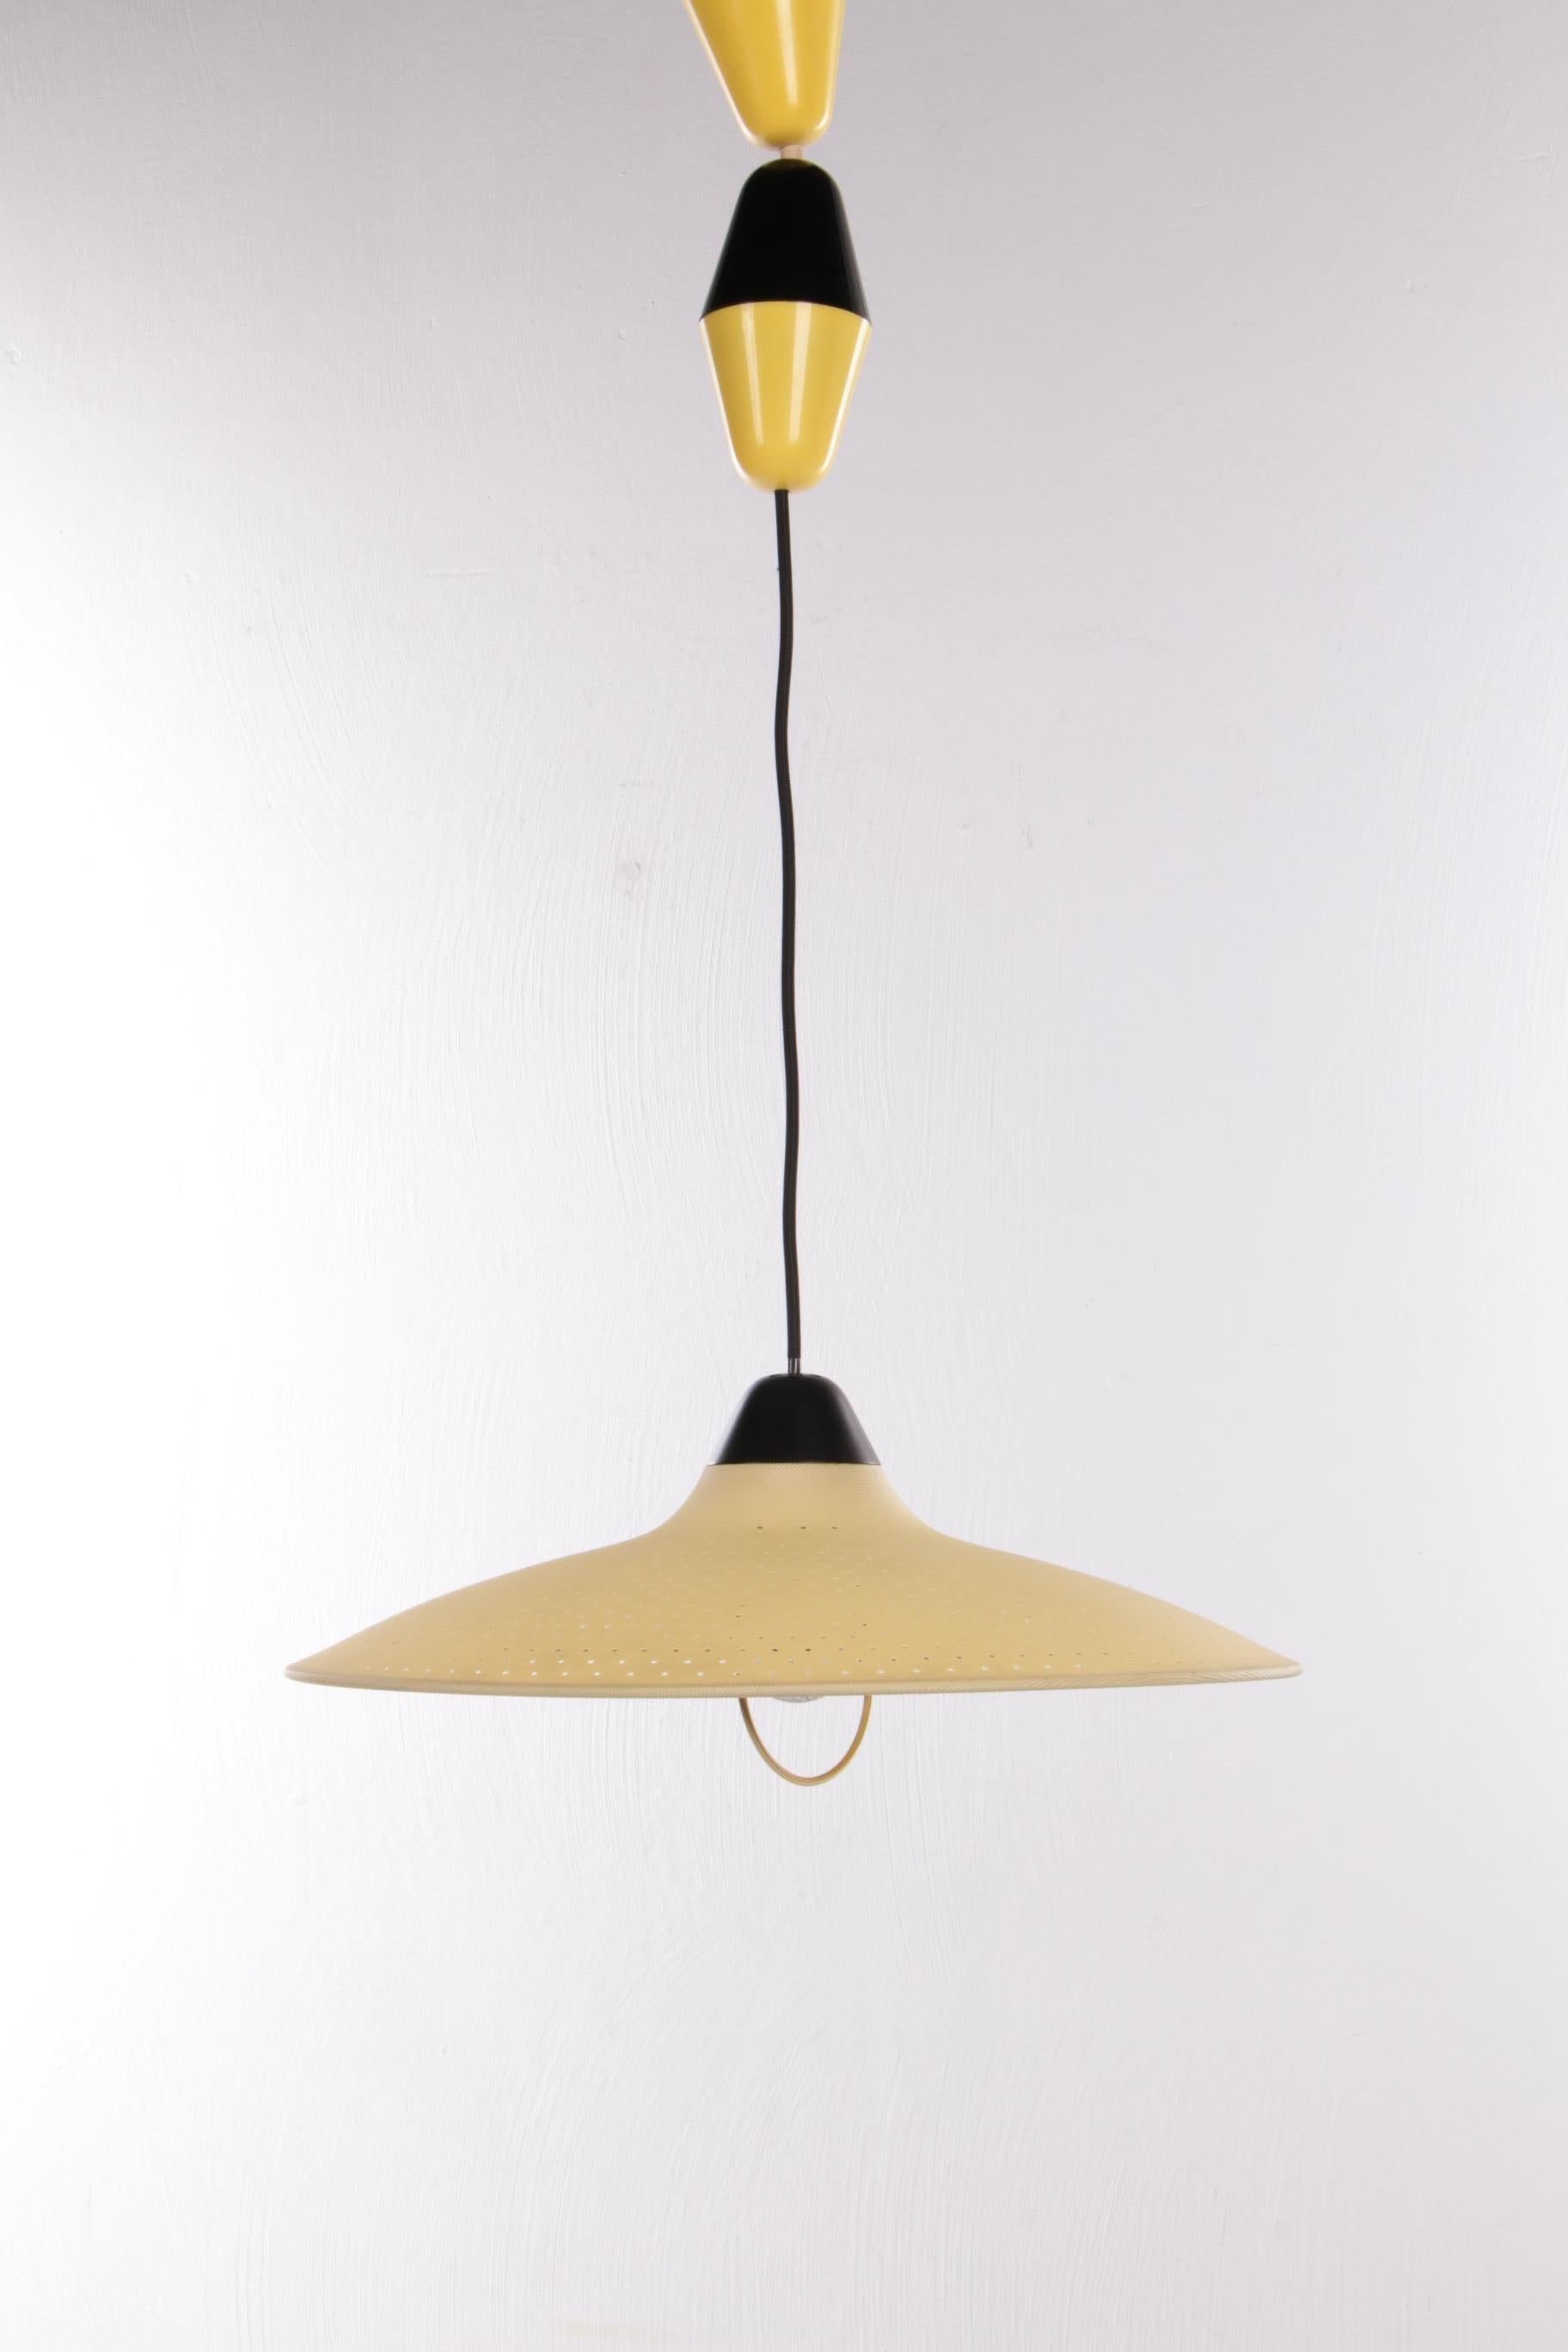 Hoso Leuchten yellow hanging lamp made very rare by Bauhaus, Germany

Vintage German Bauhaus lamp by HoSo Leuchten from Lüdenscheid, Germany. Made around the 60s-70s. Completely made of plastic. The black/yellow 'drop' on the cord was originally a